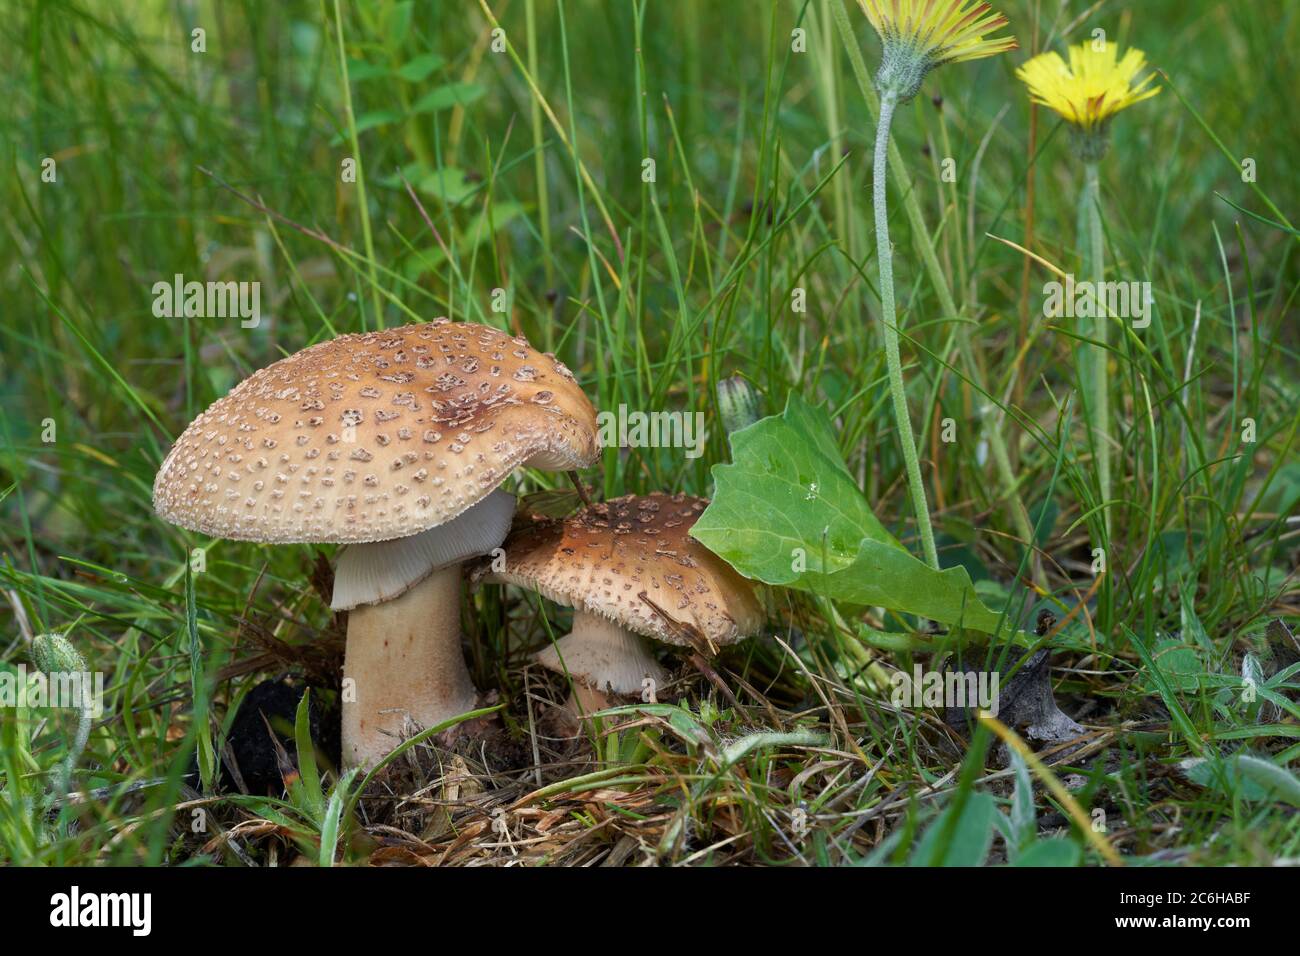 Edible mushroom Amanita rubescens in the meadow under birch and aspen trees. Known as blusher mushroom. Wild musrooms growing in the grass. Stock Photo